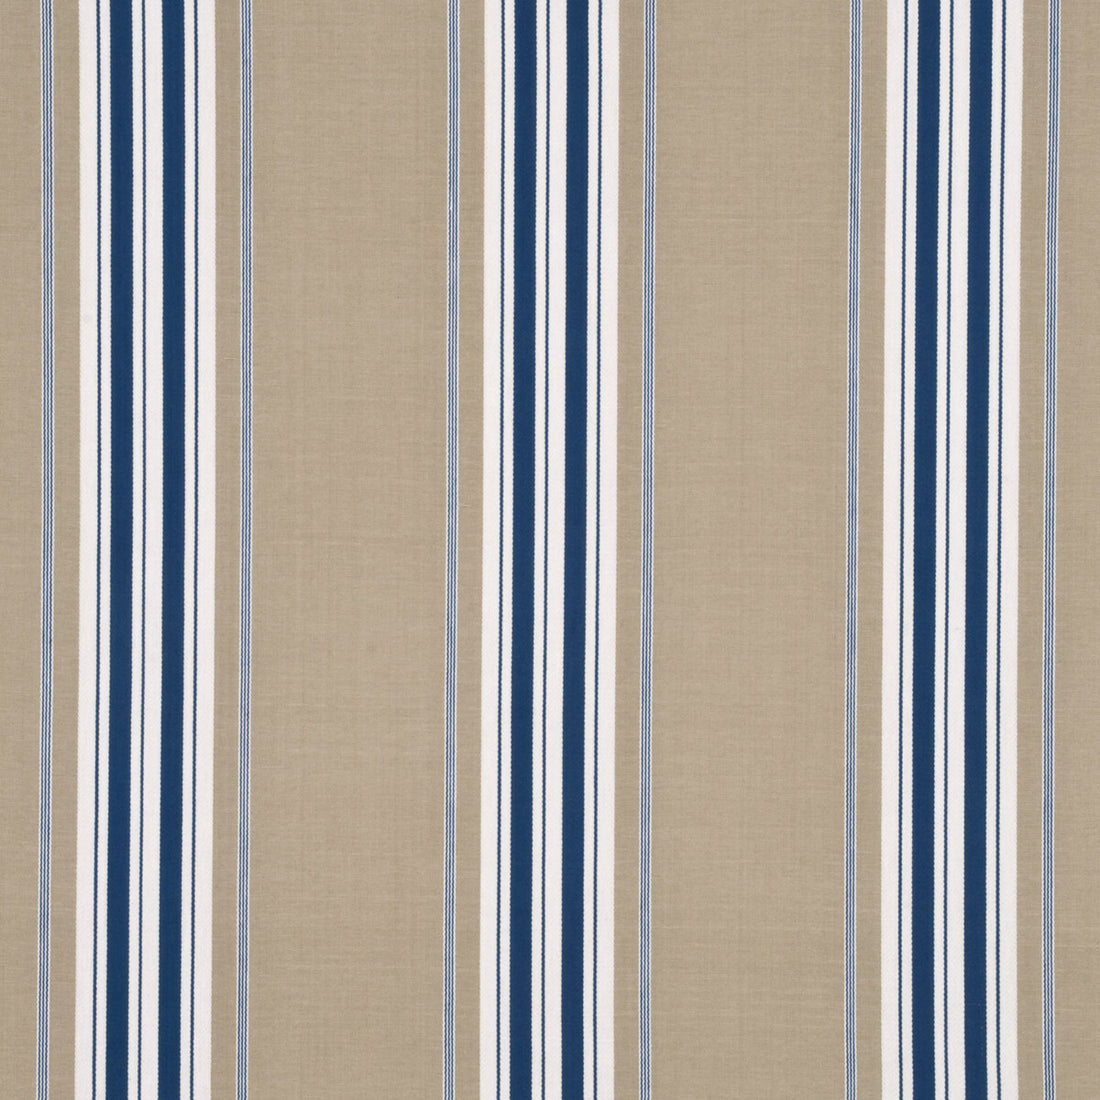 Sherbourne Stripe fabric in indigo color - pattern BF10447.1.0 - by G P &amp; J Baker in the Marwood I collection